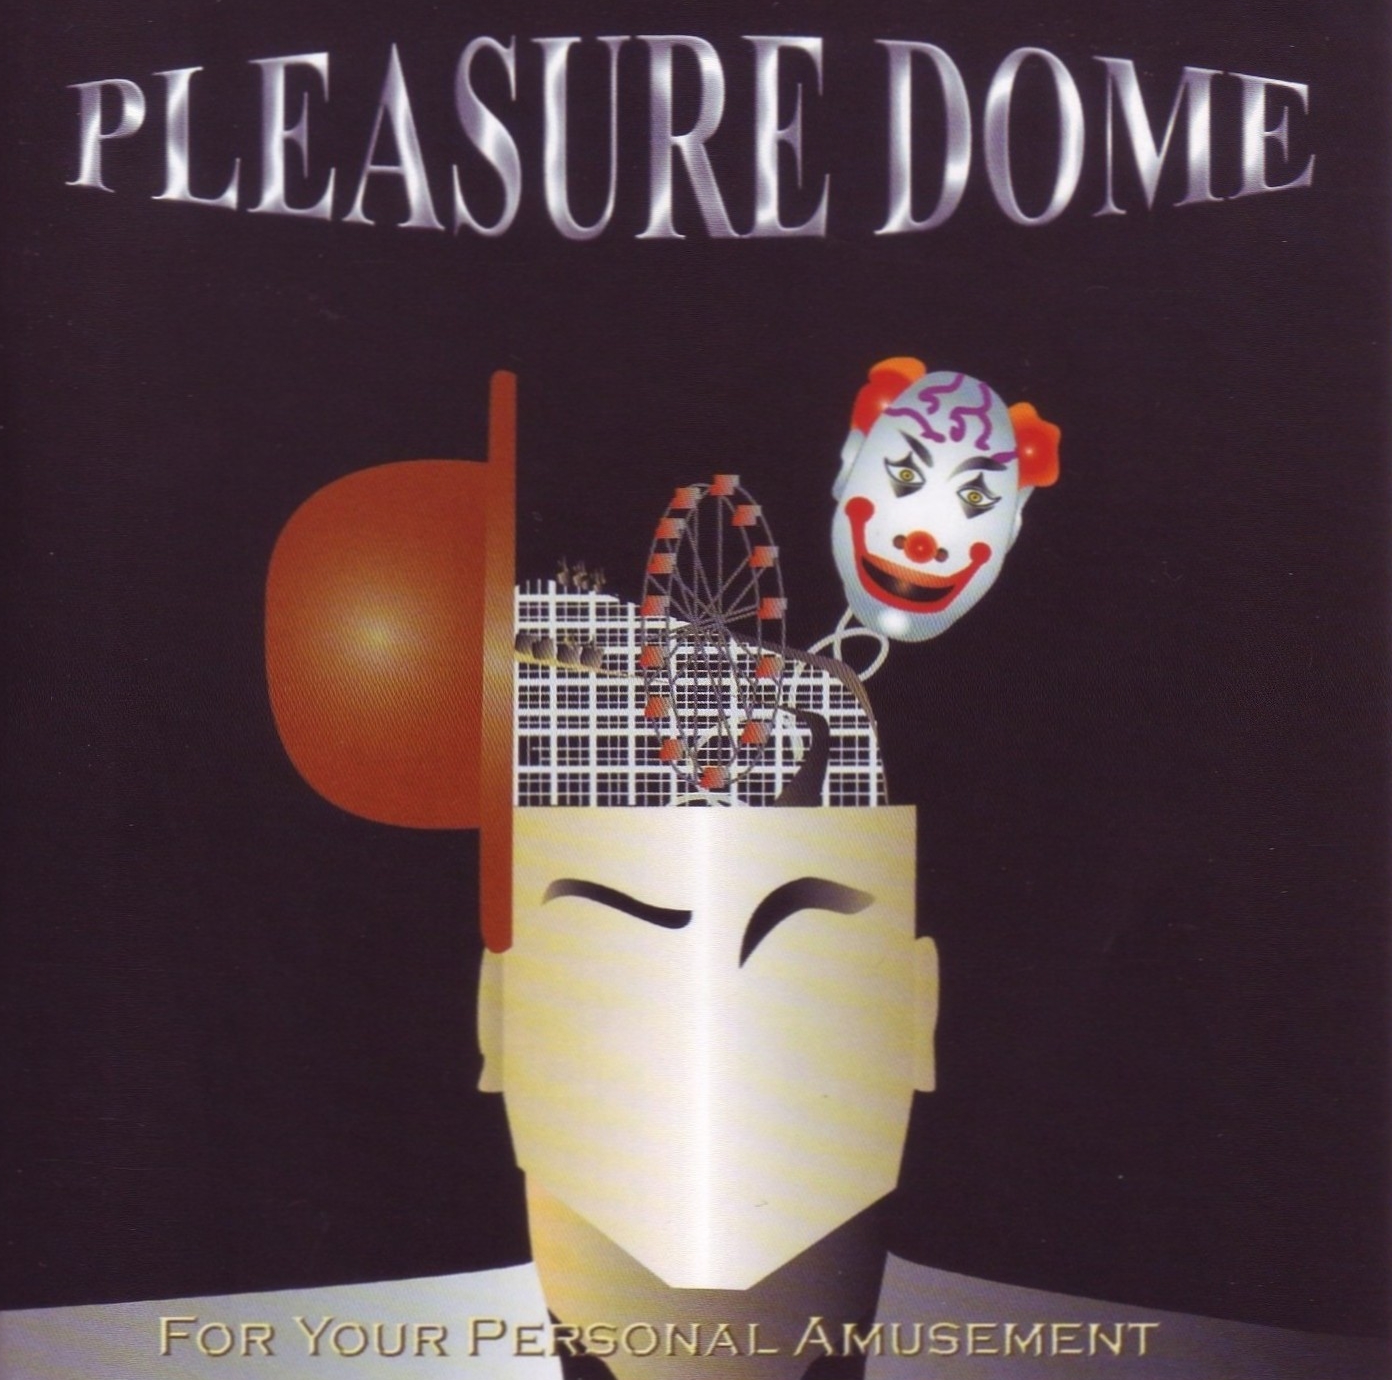 PLEASURE DOME (Ted Poley) - For Your Personal Amusement.